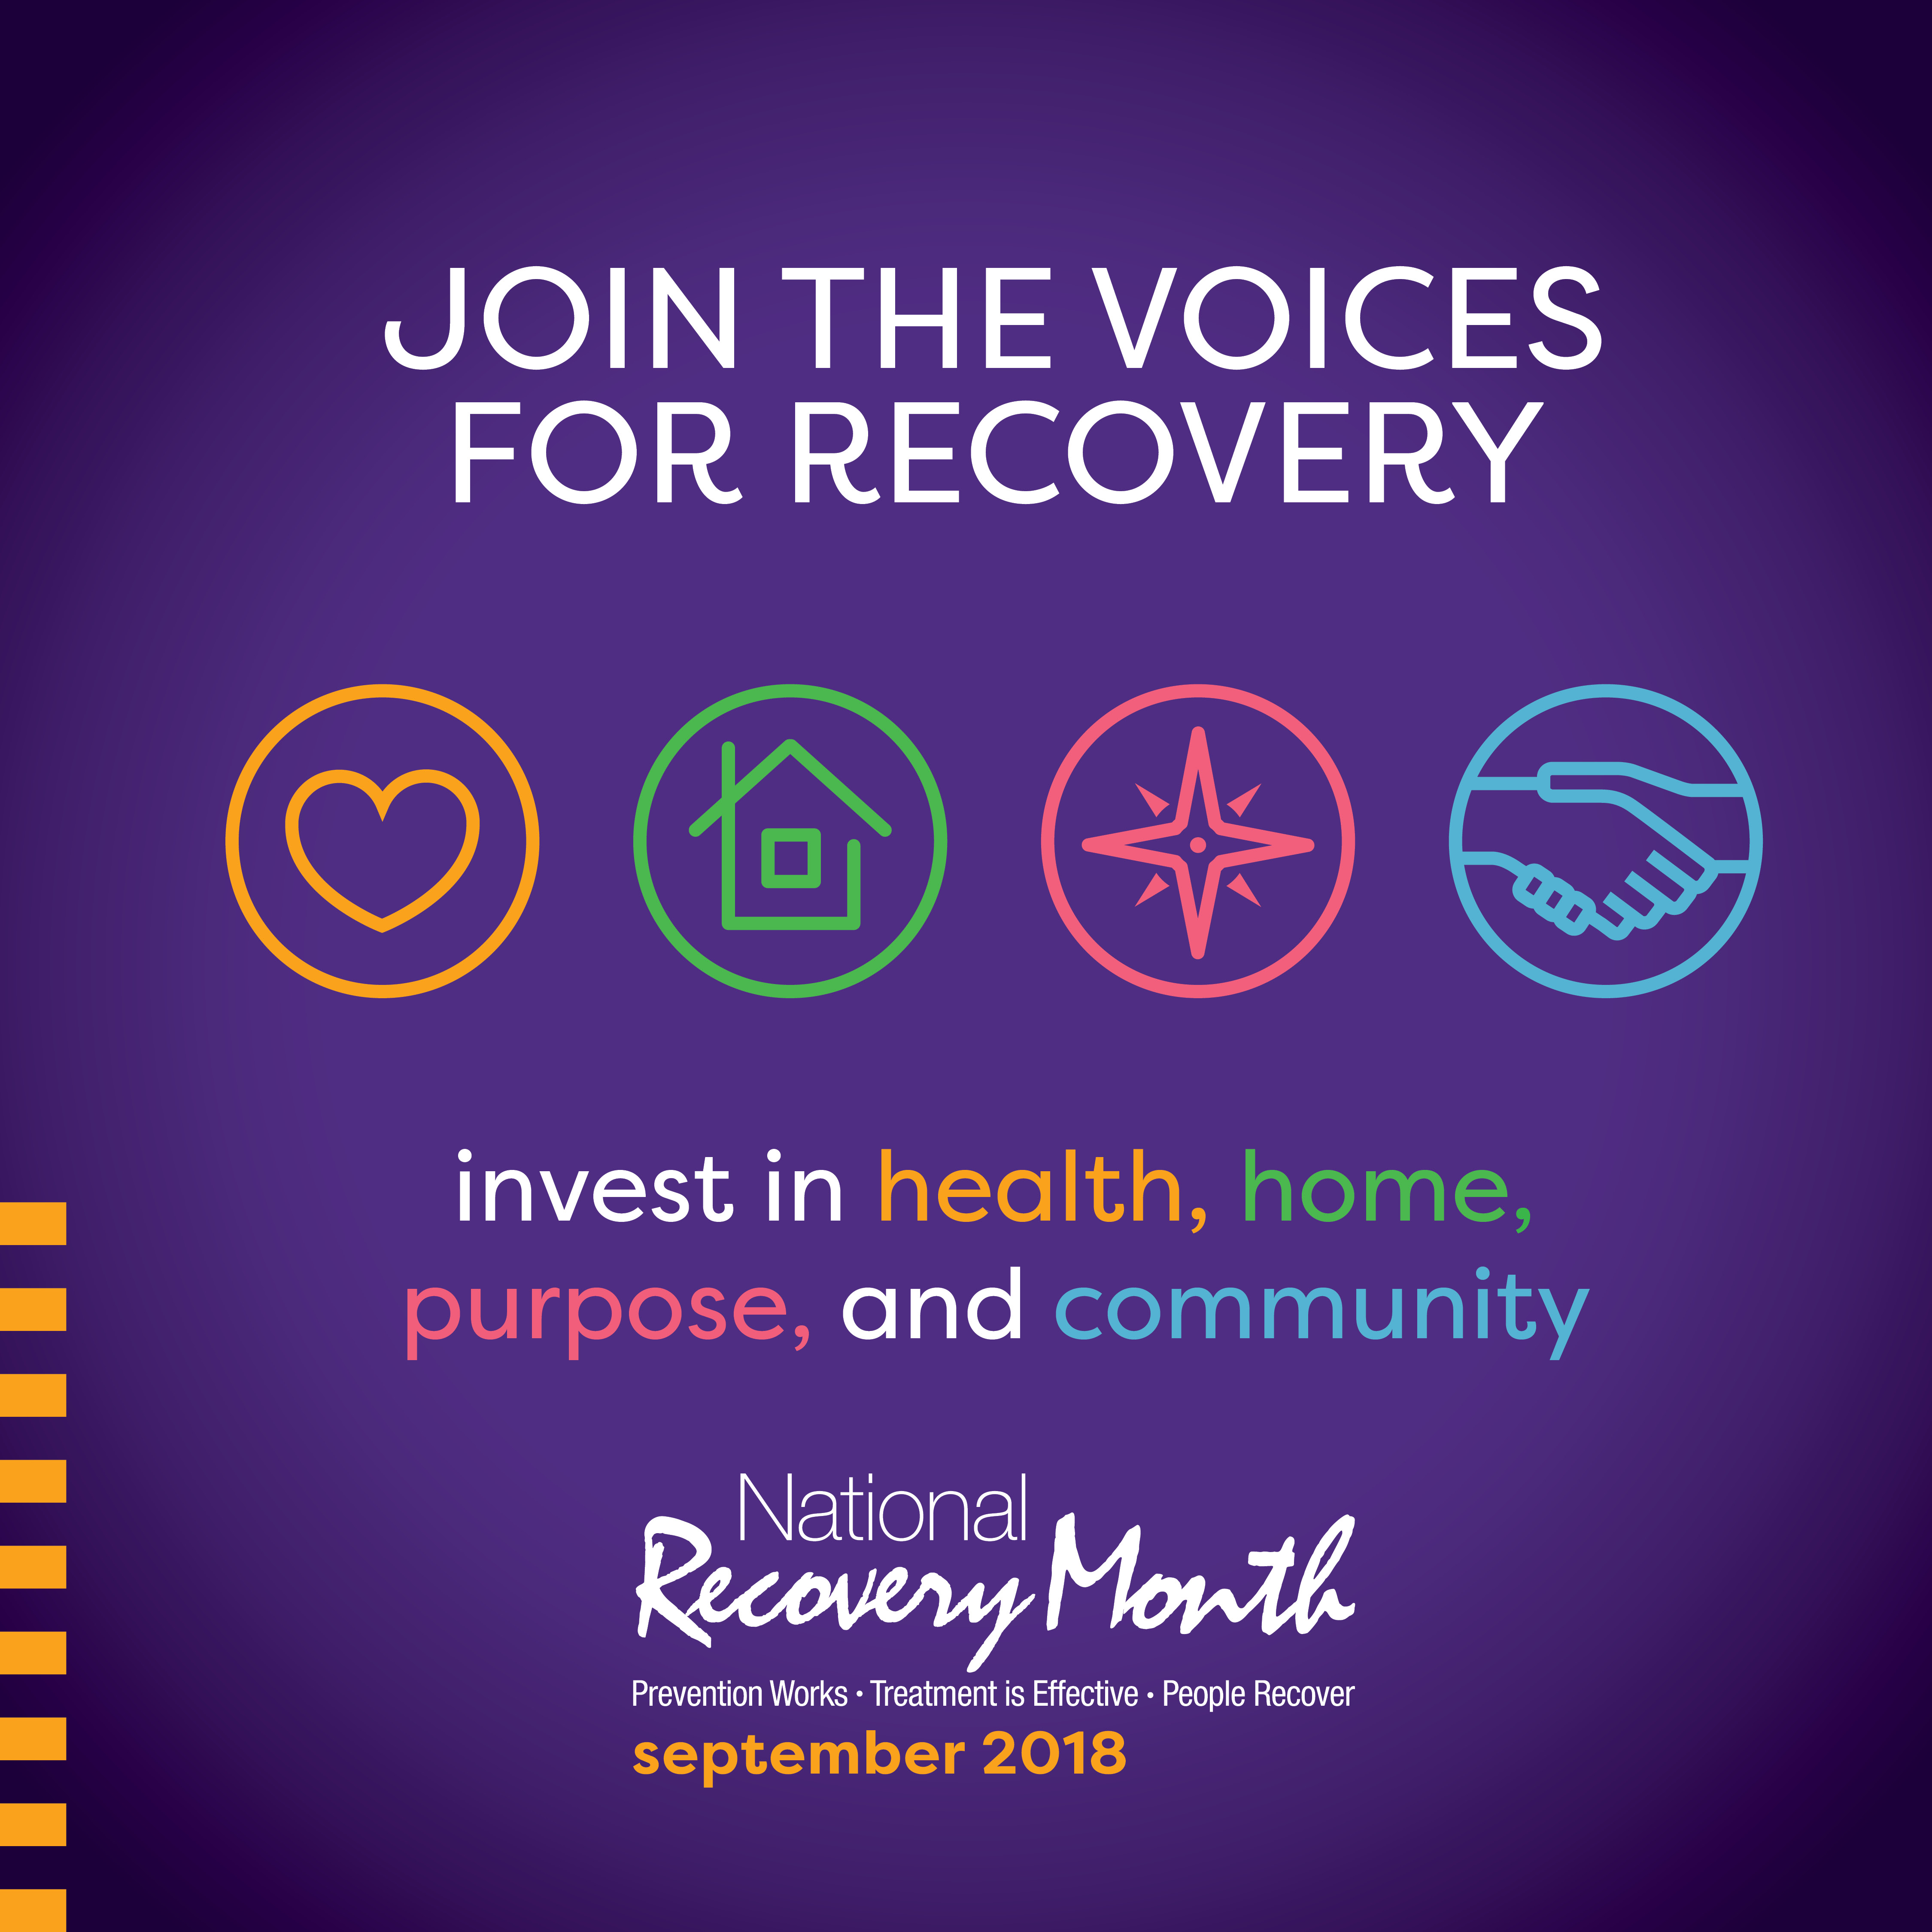 Celebrating National Recovery Month 2018